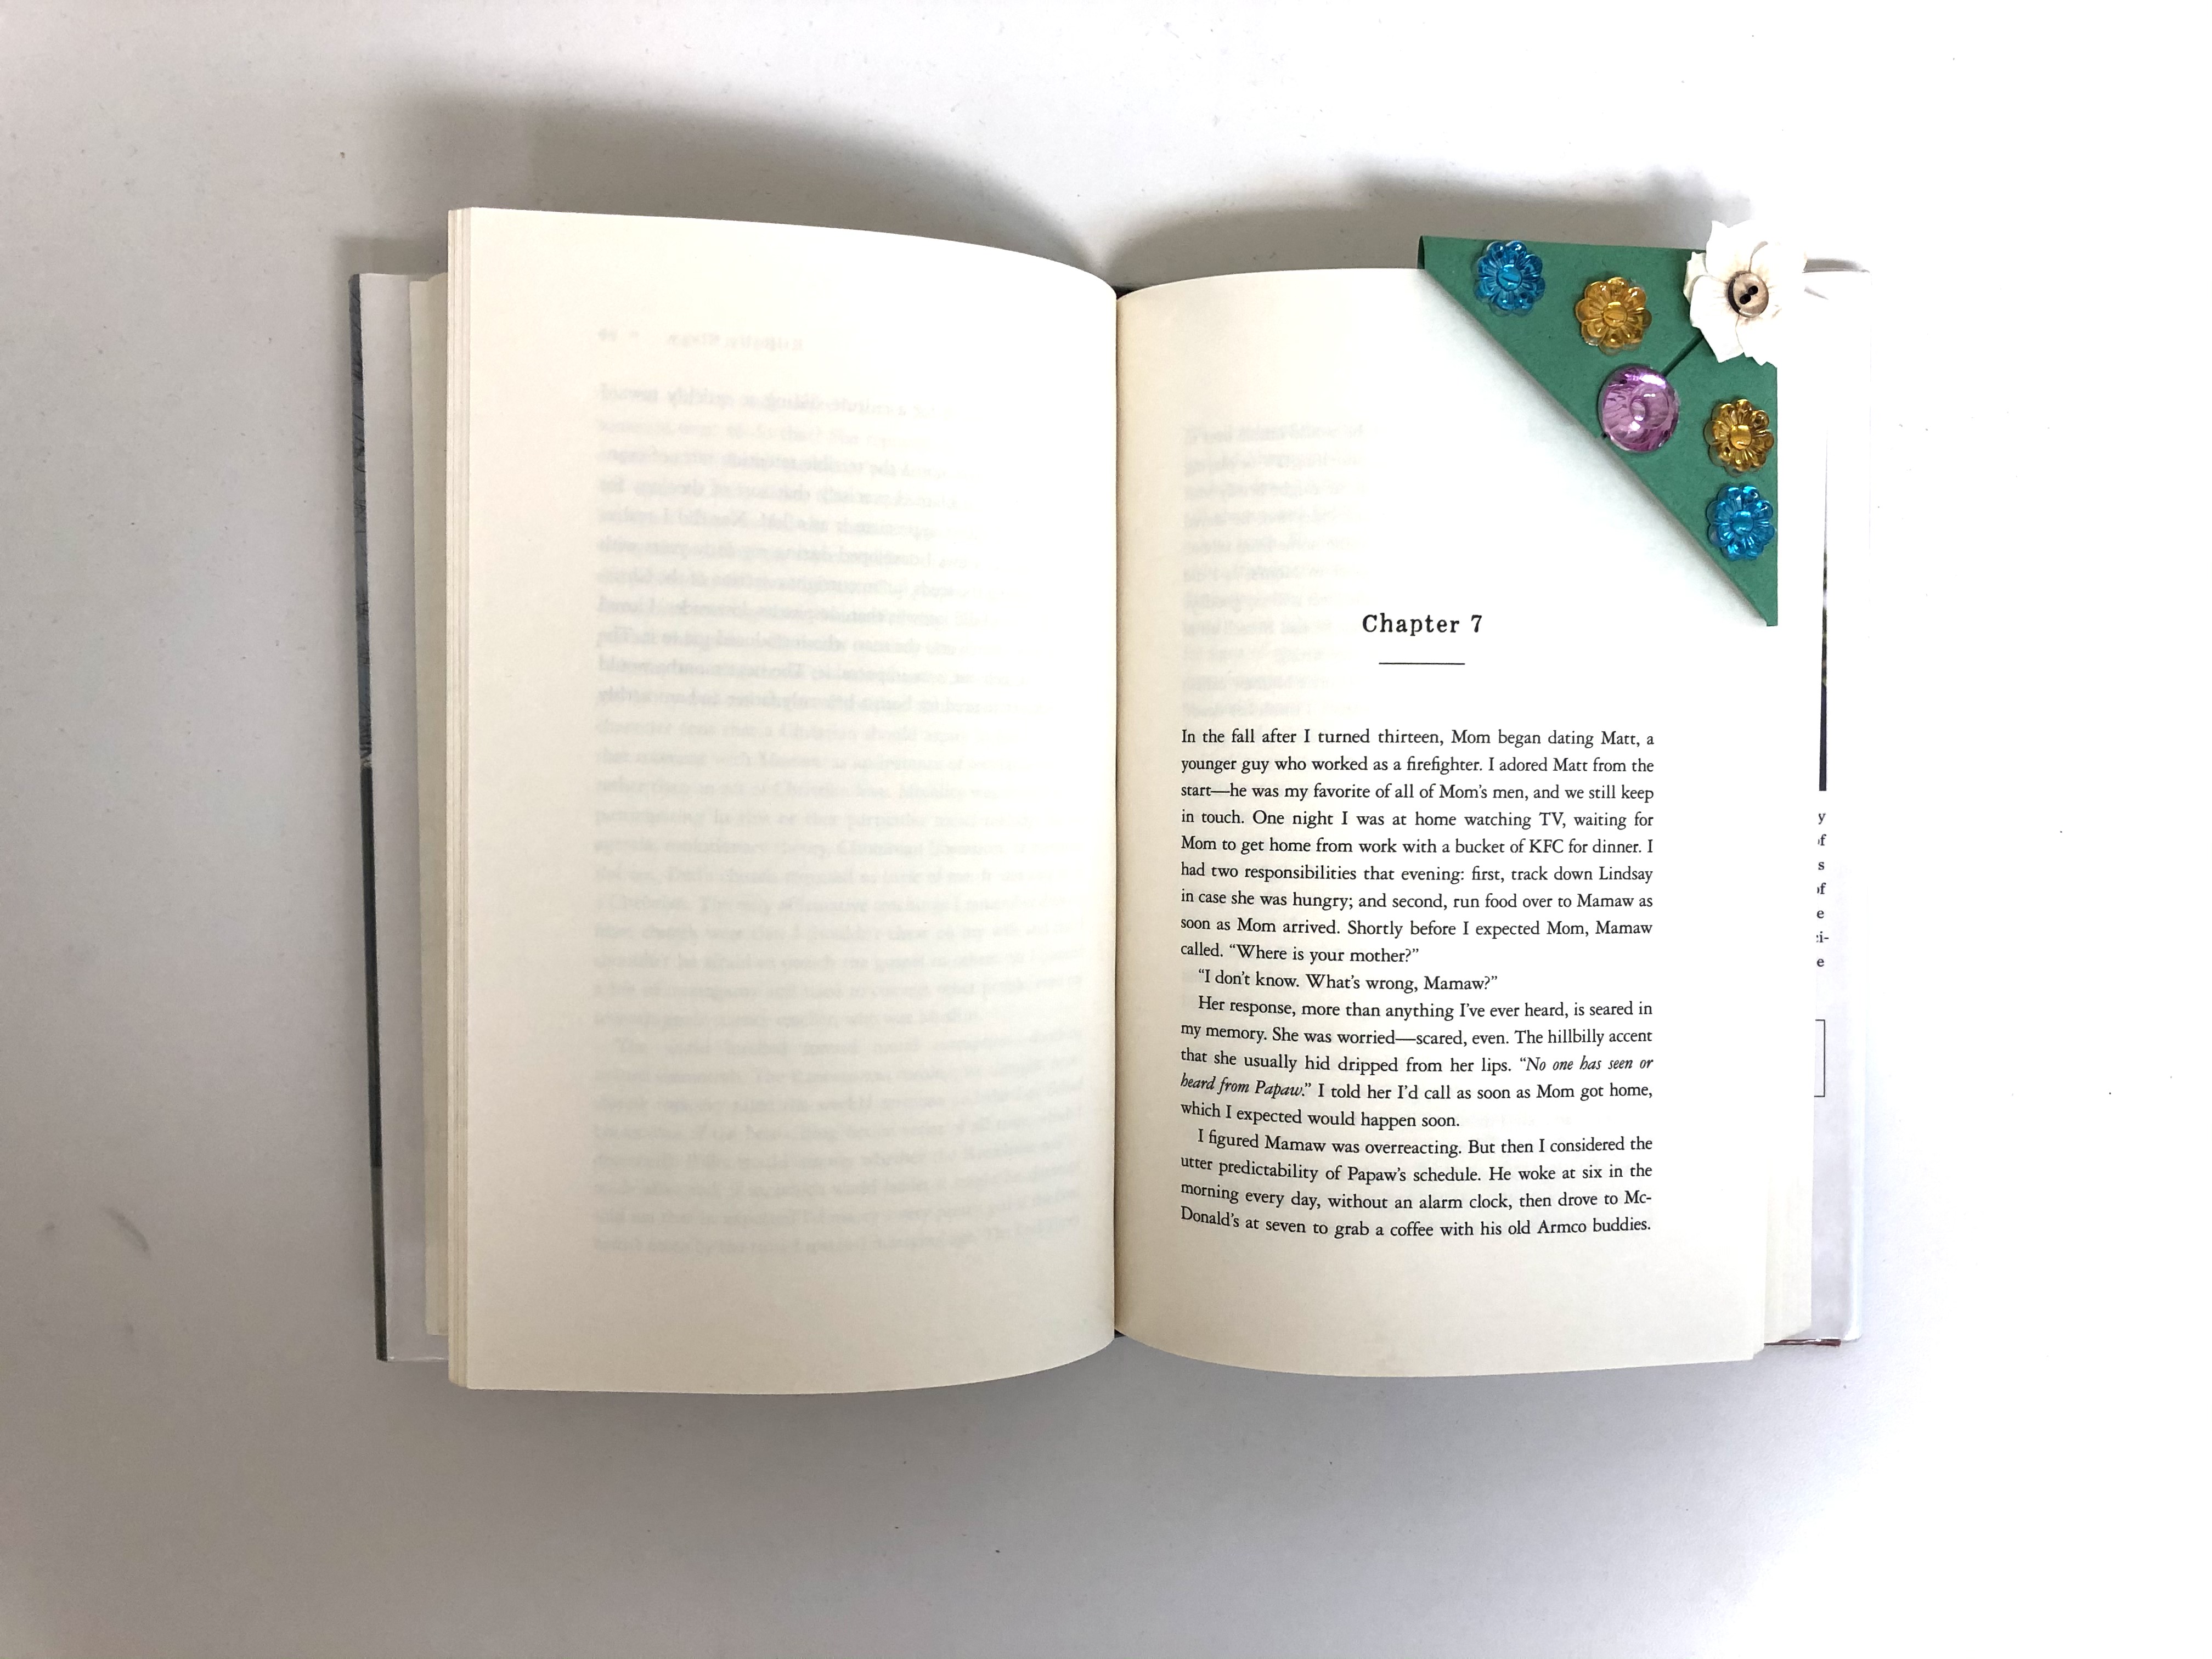 An origami bookmark in the shape of a tree marks a book page.